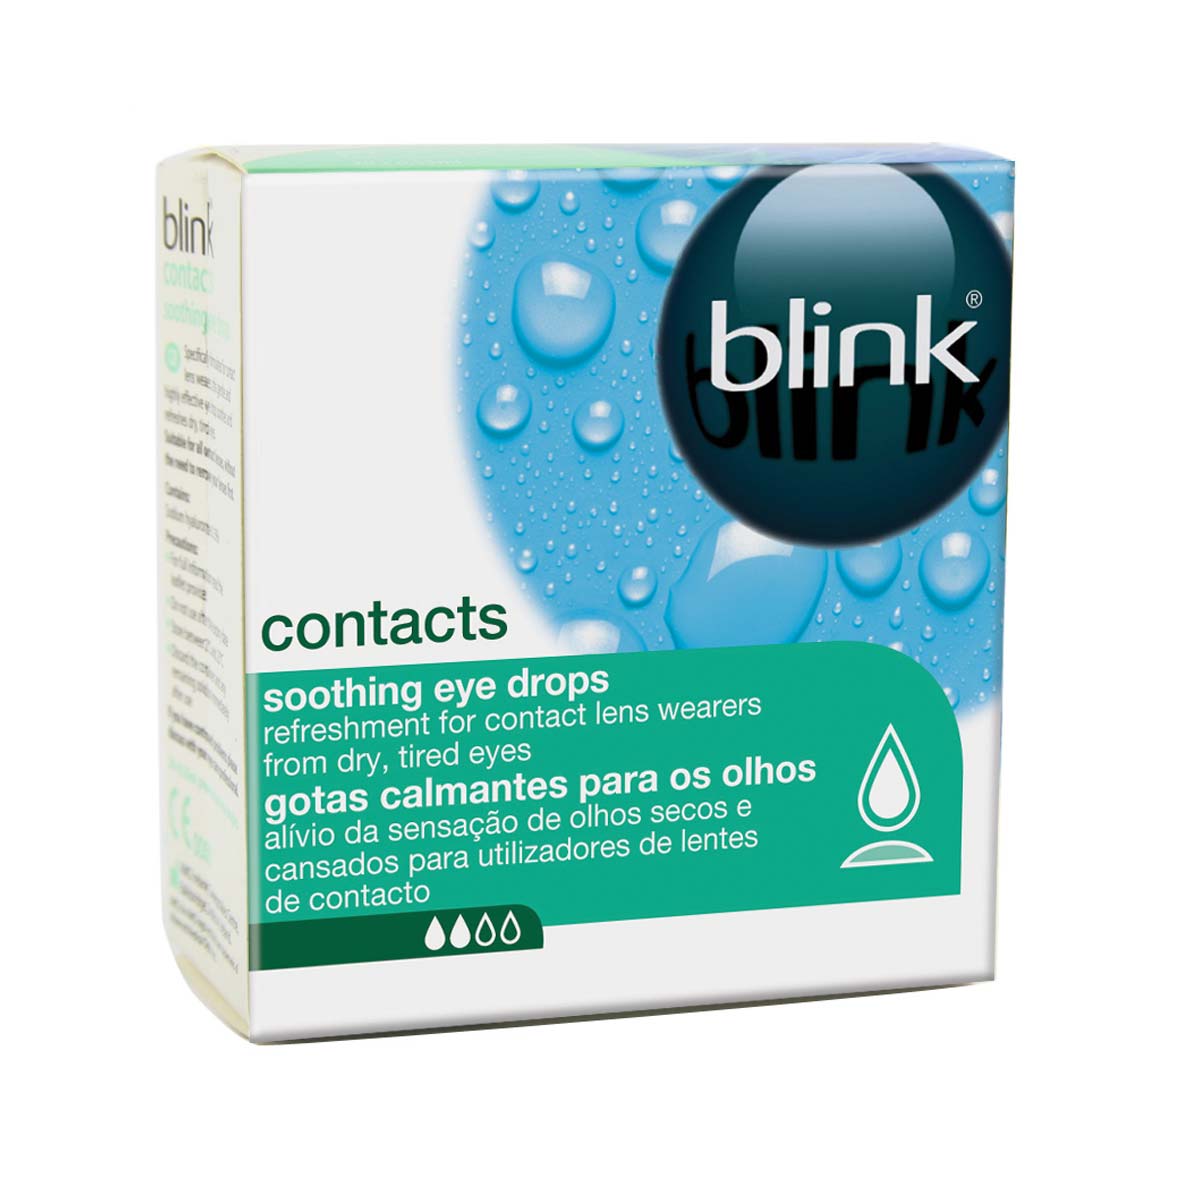 Image of Blink Contacts Eye Drops Vials 20035ml